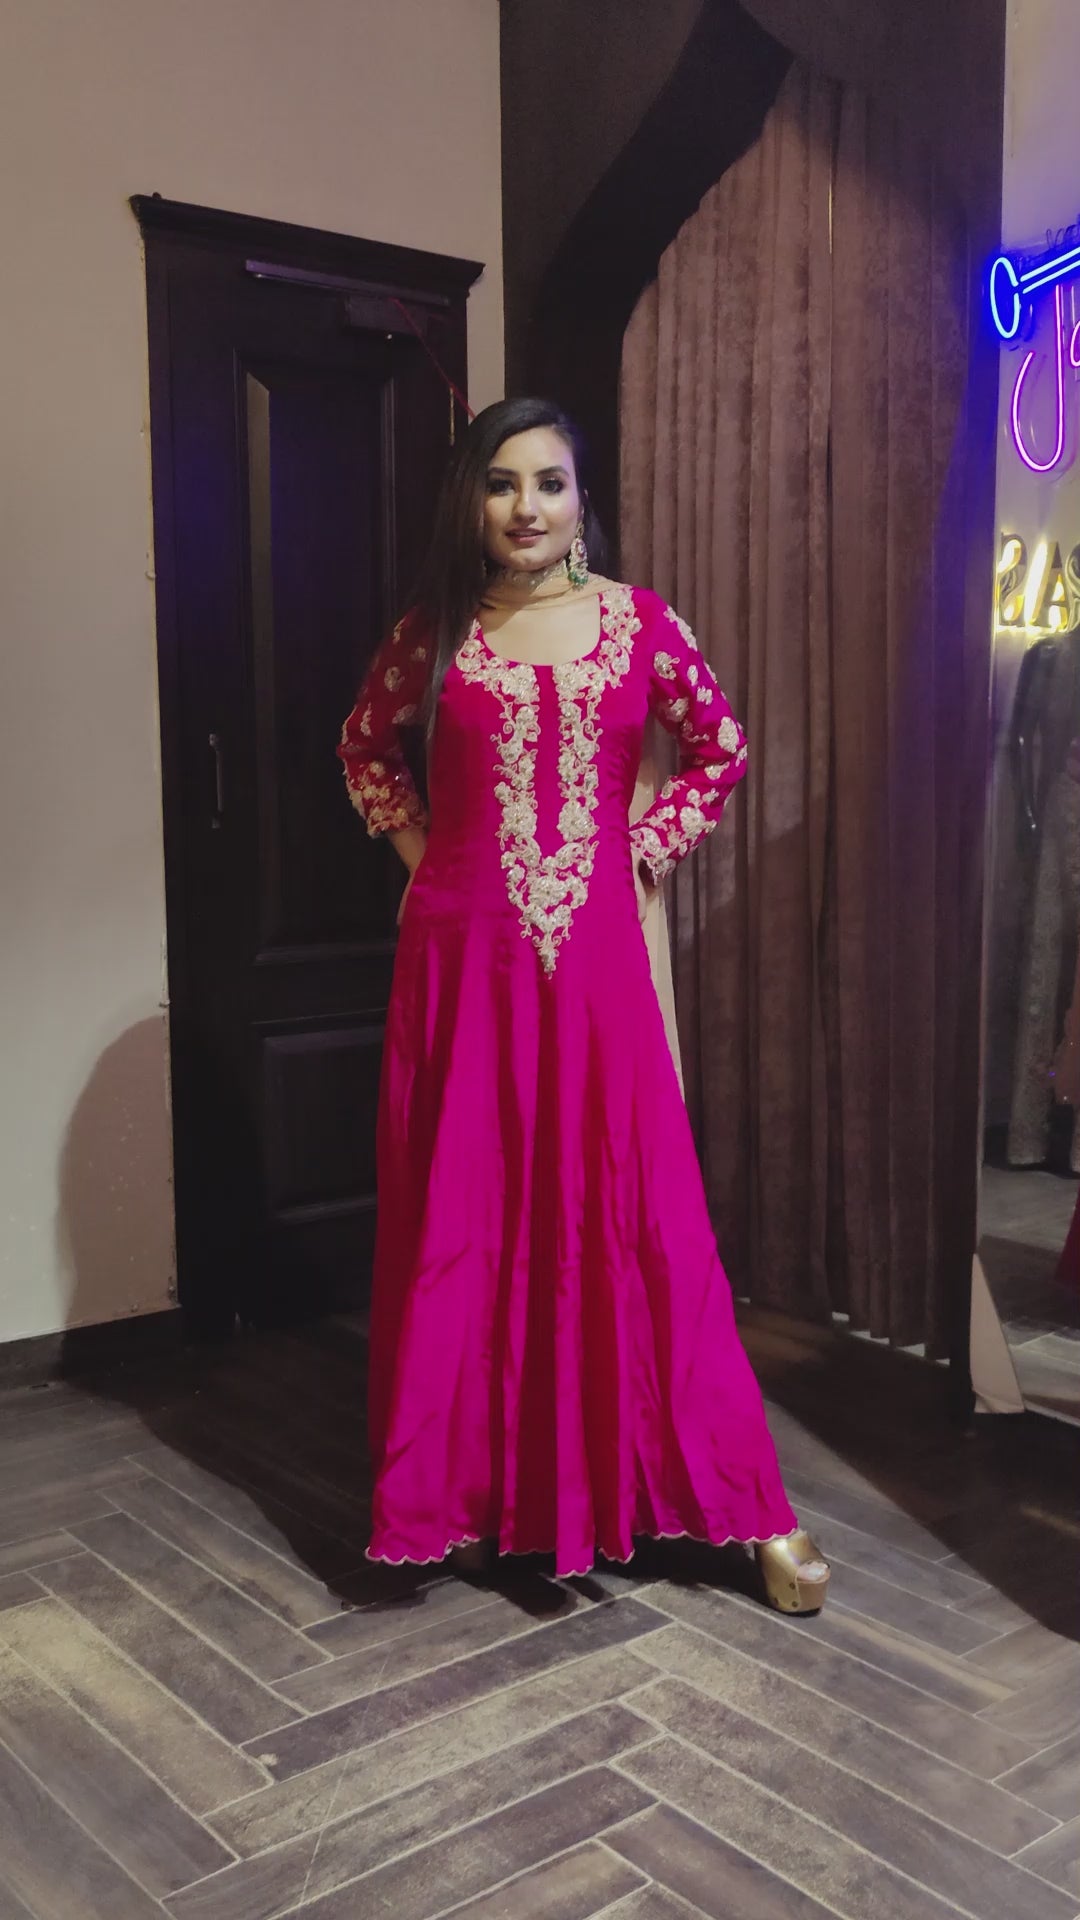 Strawberry Pink Embroidered Anarkali - Indian Clothing in Denver, CO, Aurora, CO, Boulder, CO, Fort Collins, CO, Colorado Springs, CO, Parker, CO, Highlands Ranch, CO, Cherry Creek, CO, Centennial, CO, and Longmont, CO. Nationwide shipping USA- India Fashion X